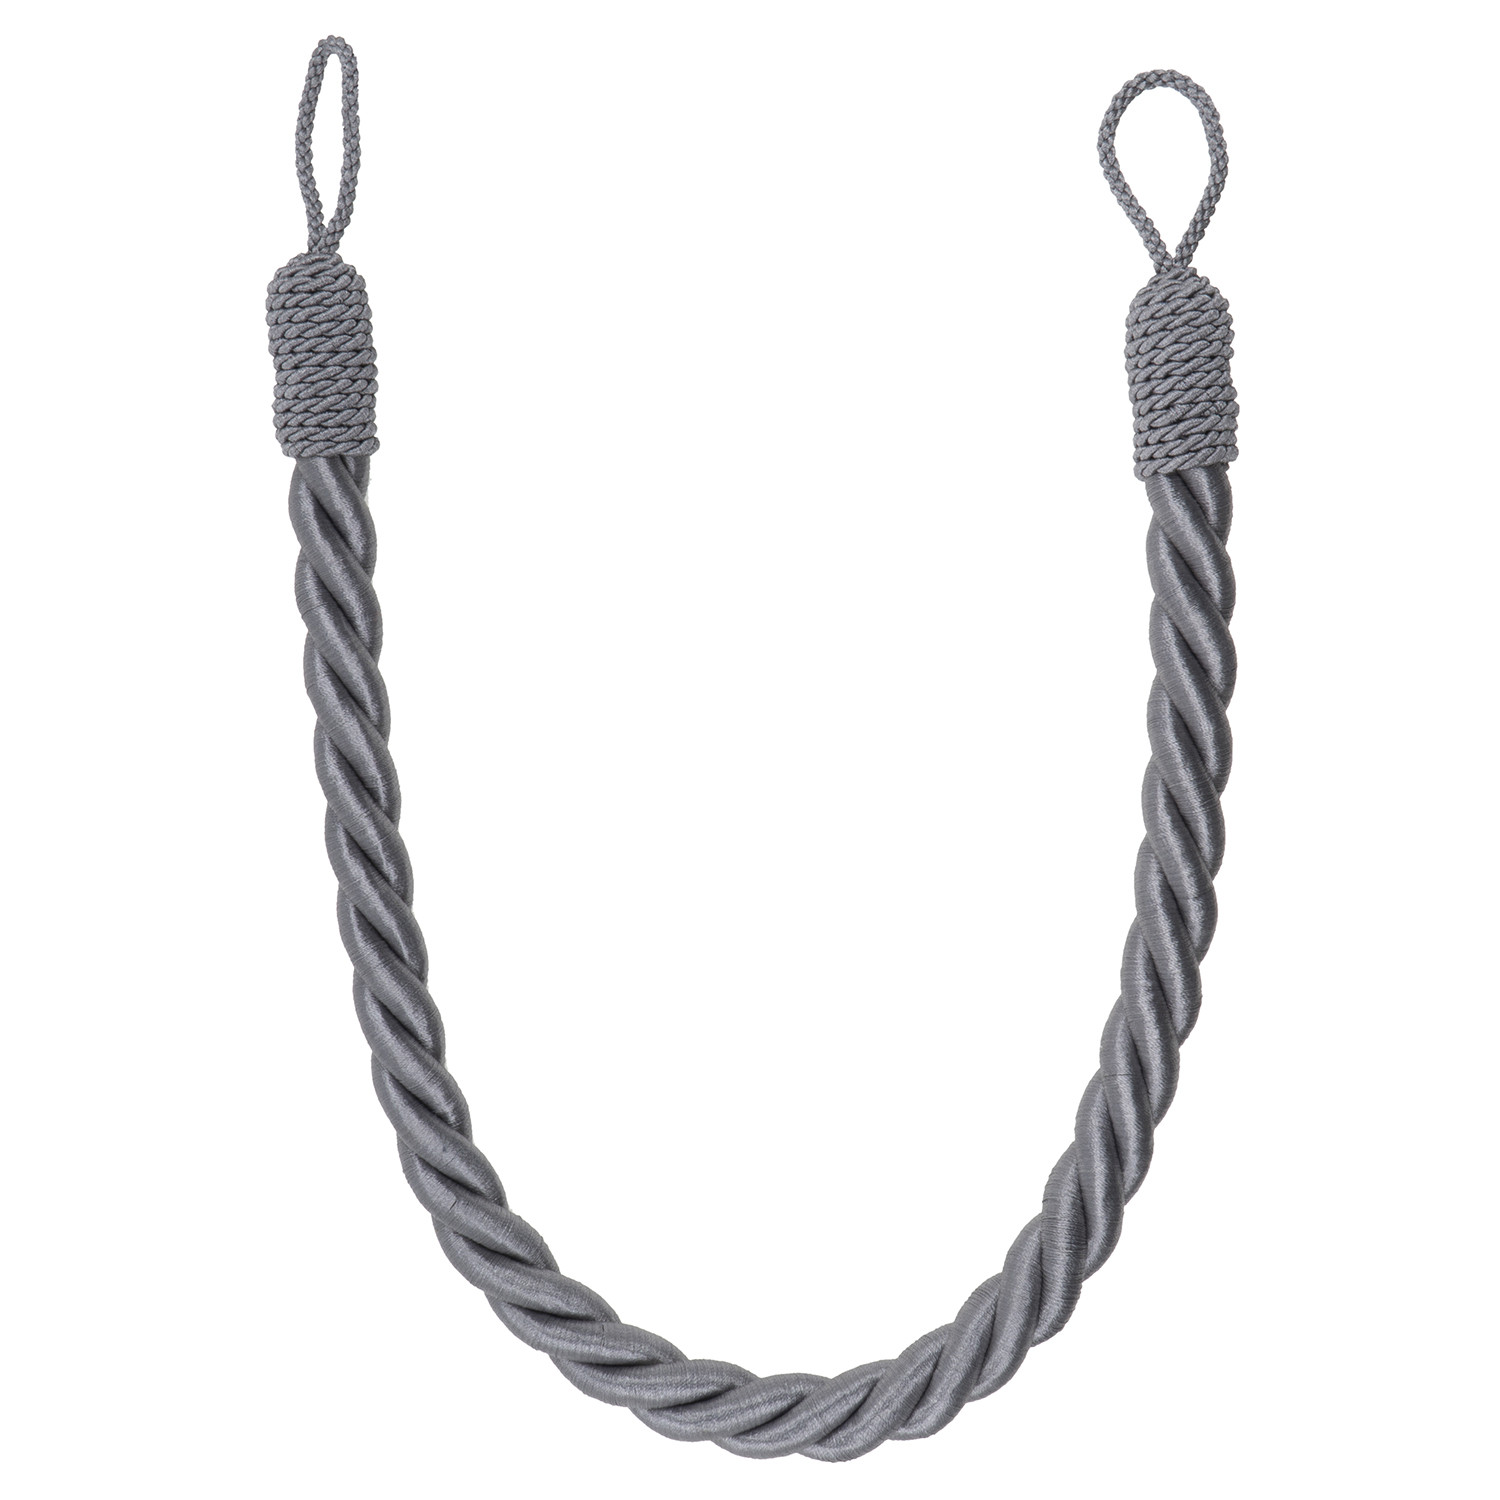 Dove Grey Reef Rope Curtain Tie Back Image 1